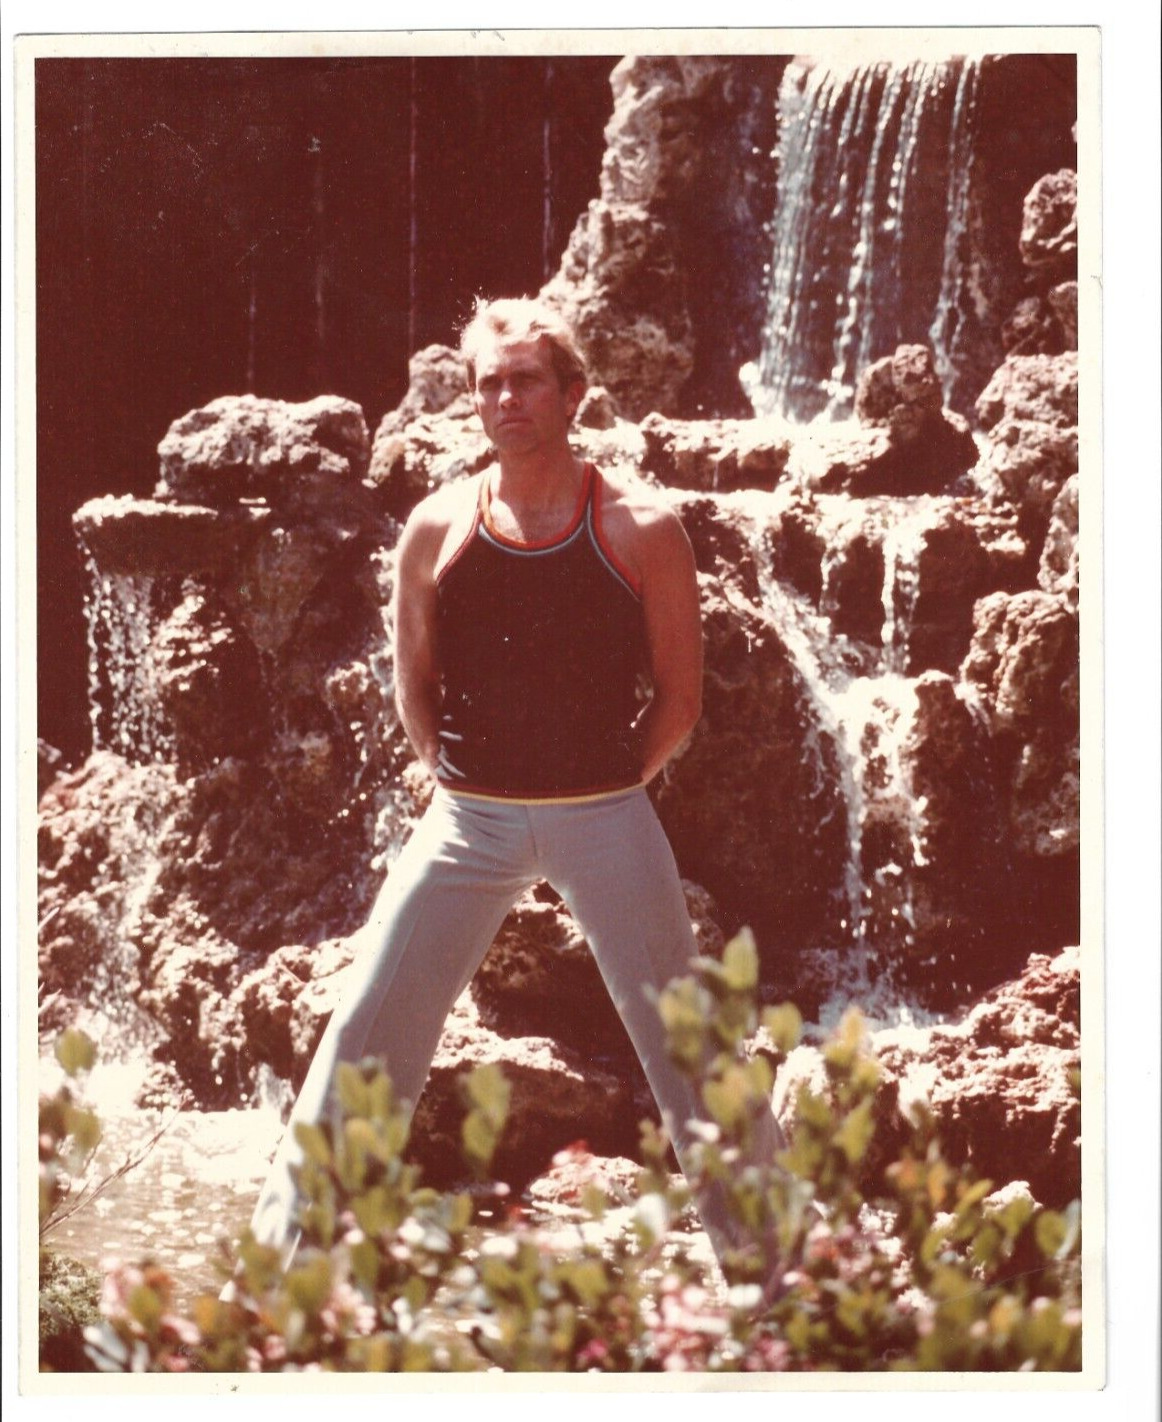 Vintage Color 8 X 10 Handsome Beefcake Tight Jeans Waterfall Man Gay 1970s Photo